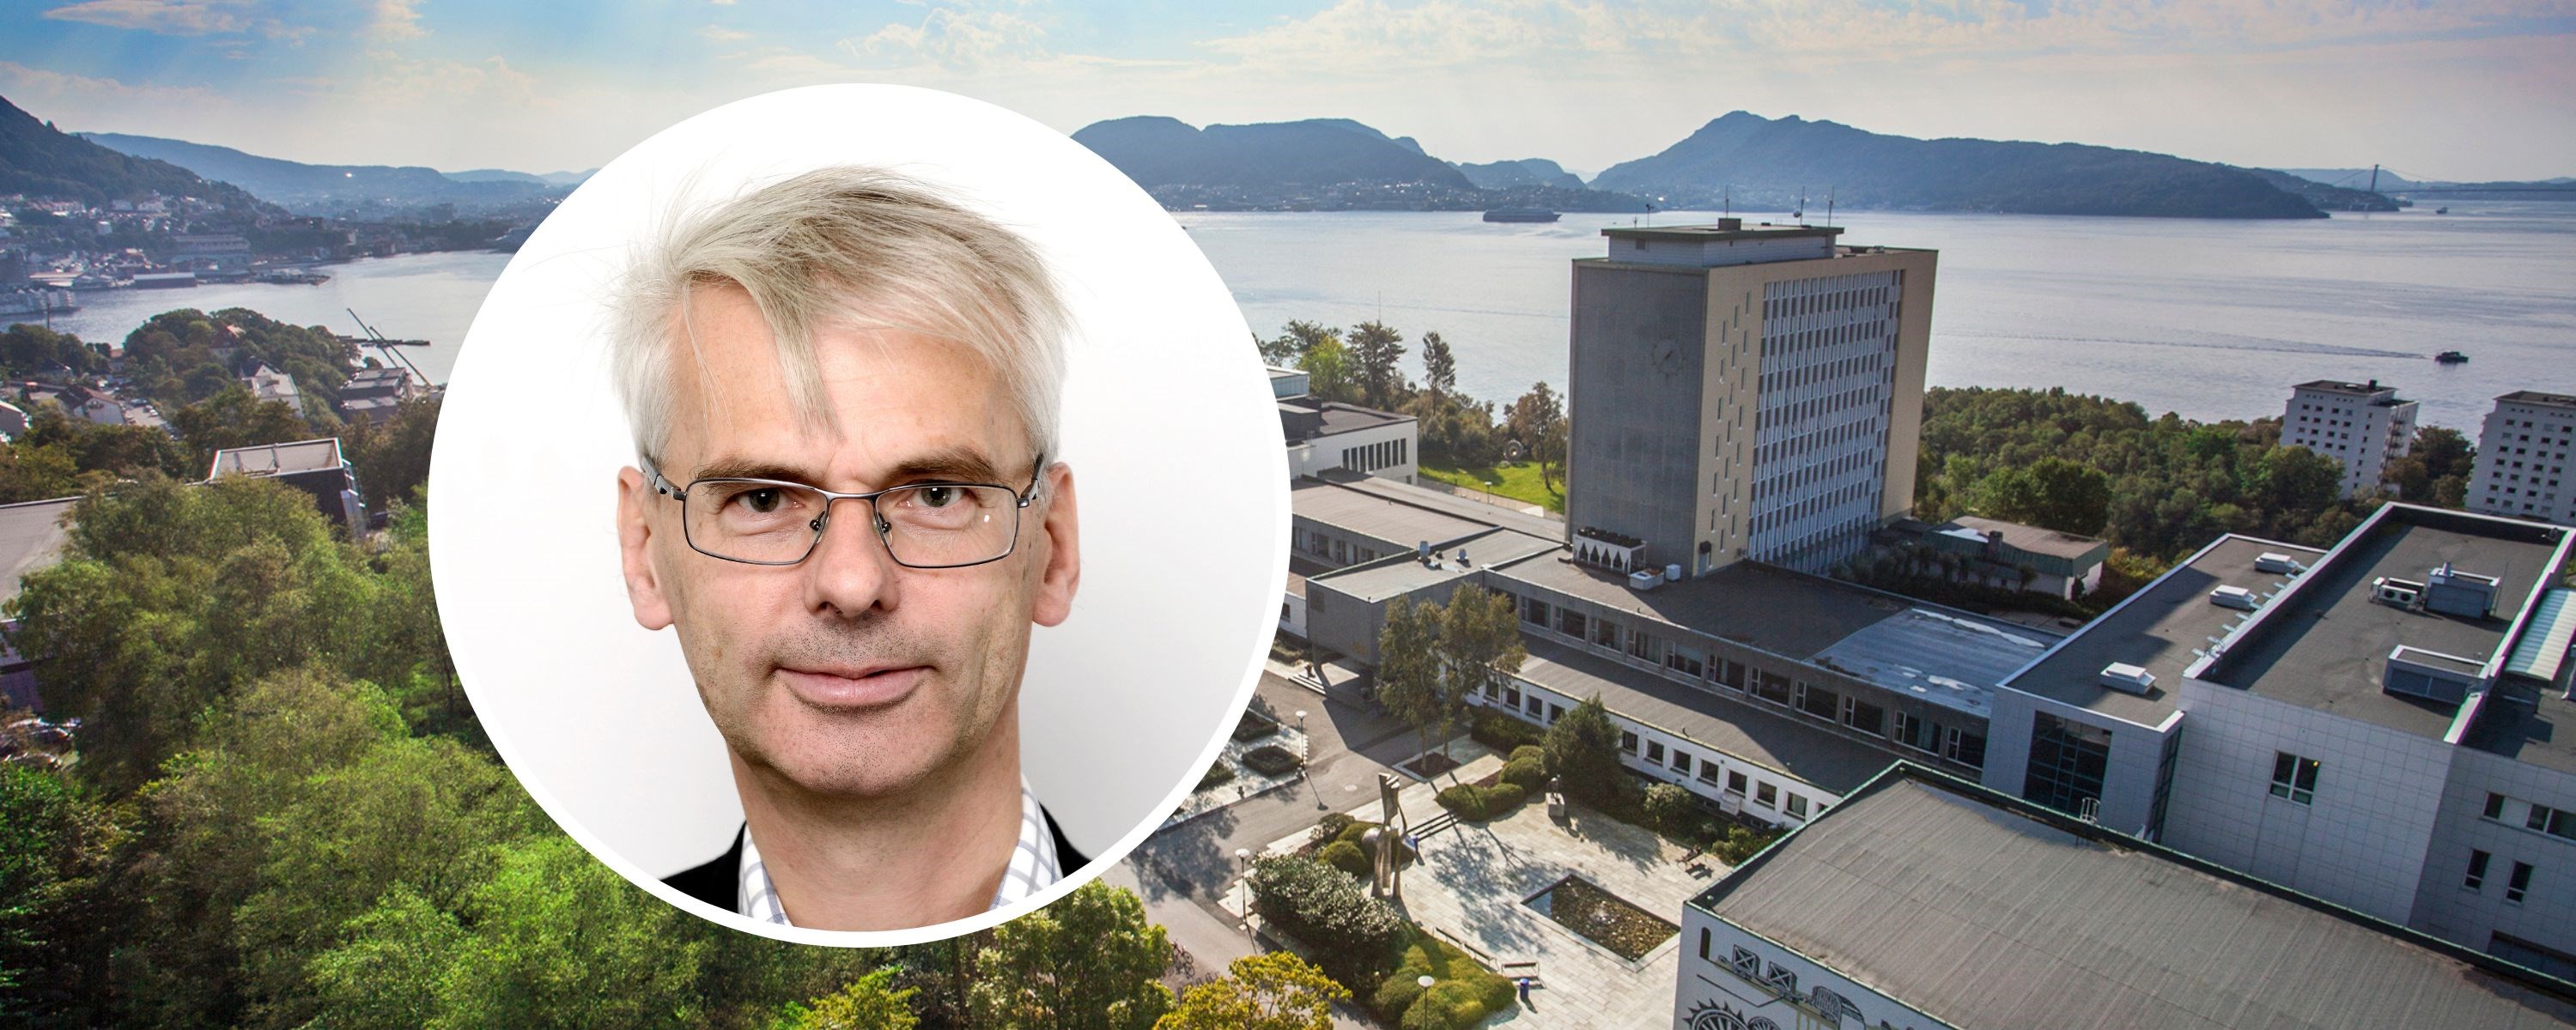 Picture of Rector Øystein Thøgersen and the NHH campus. Photo: Varde Solutions and Helge Skodvin